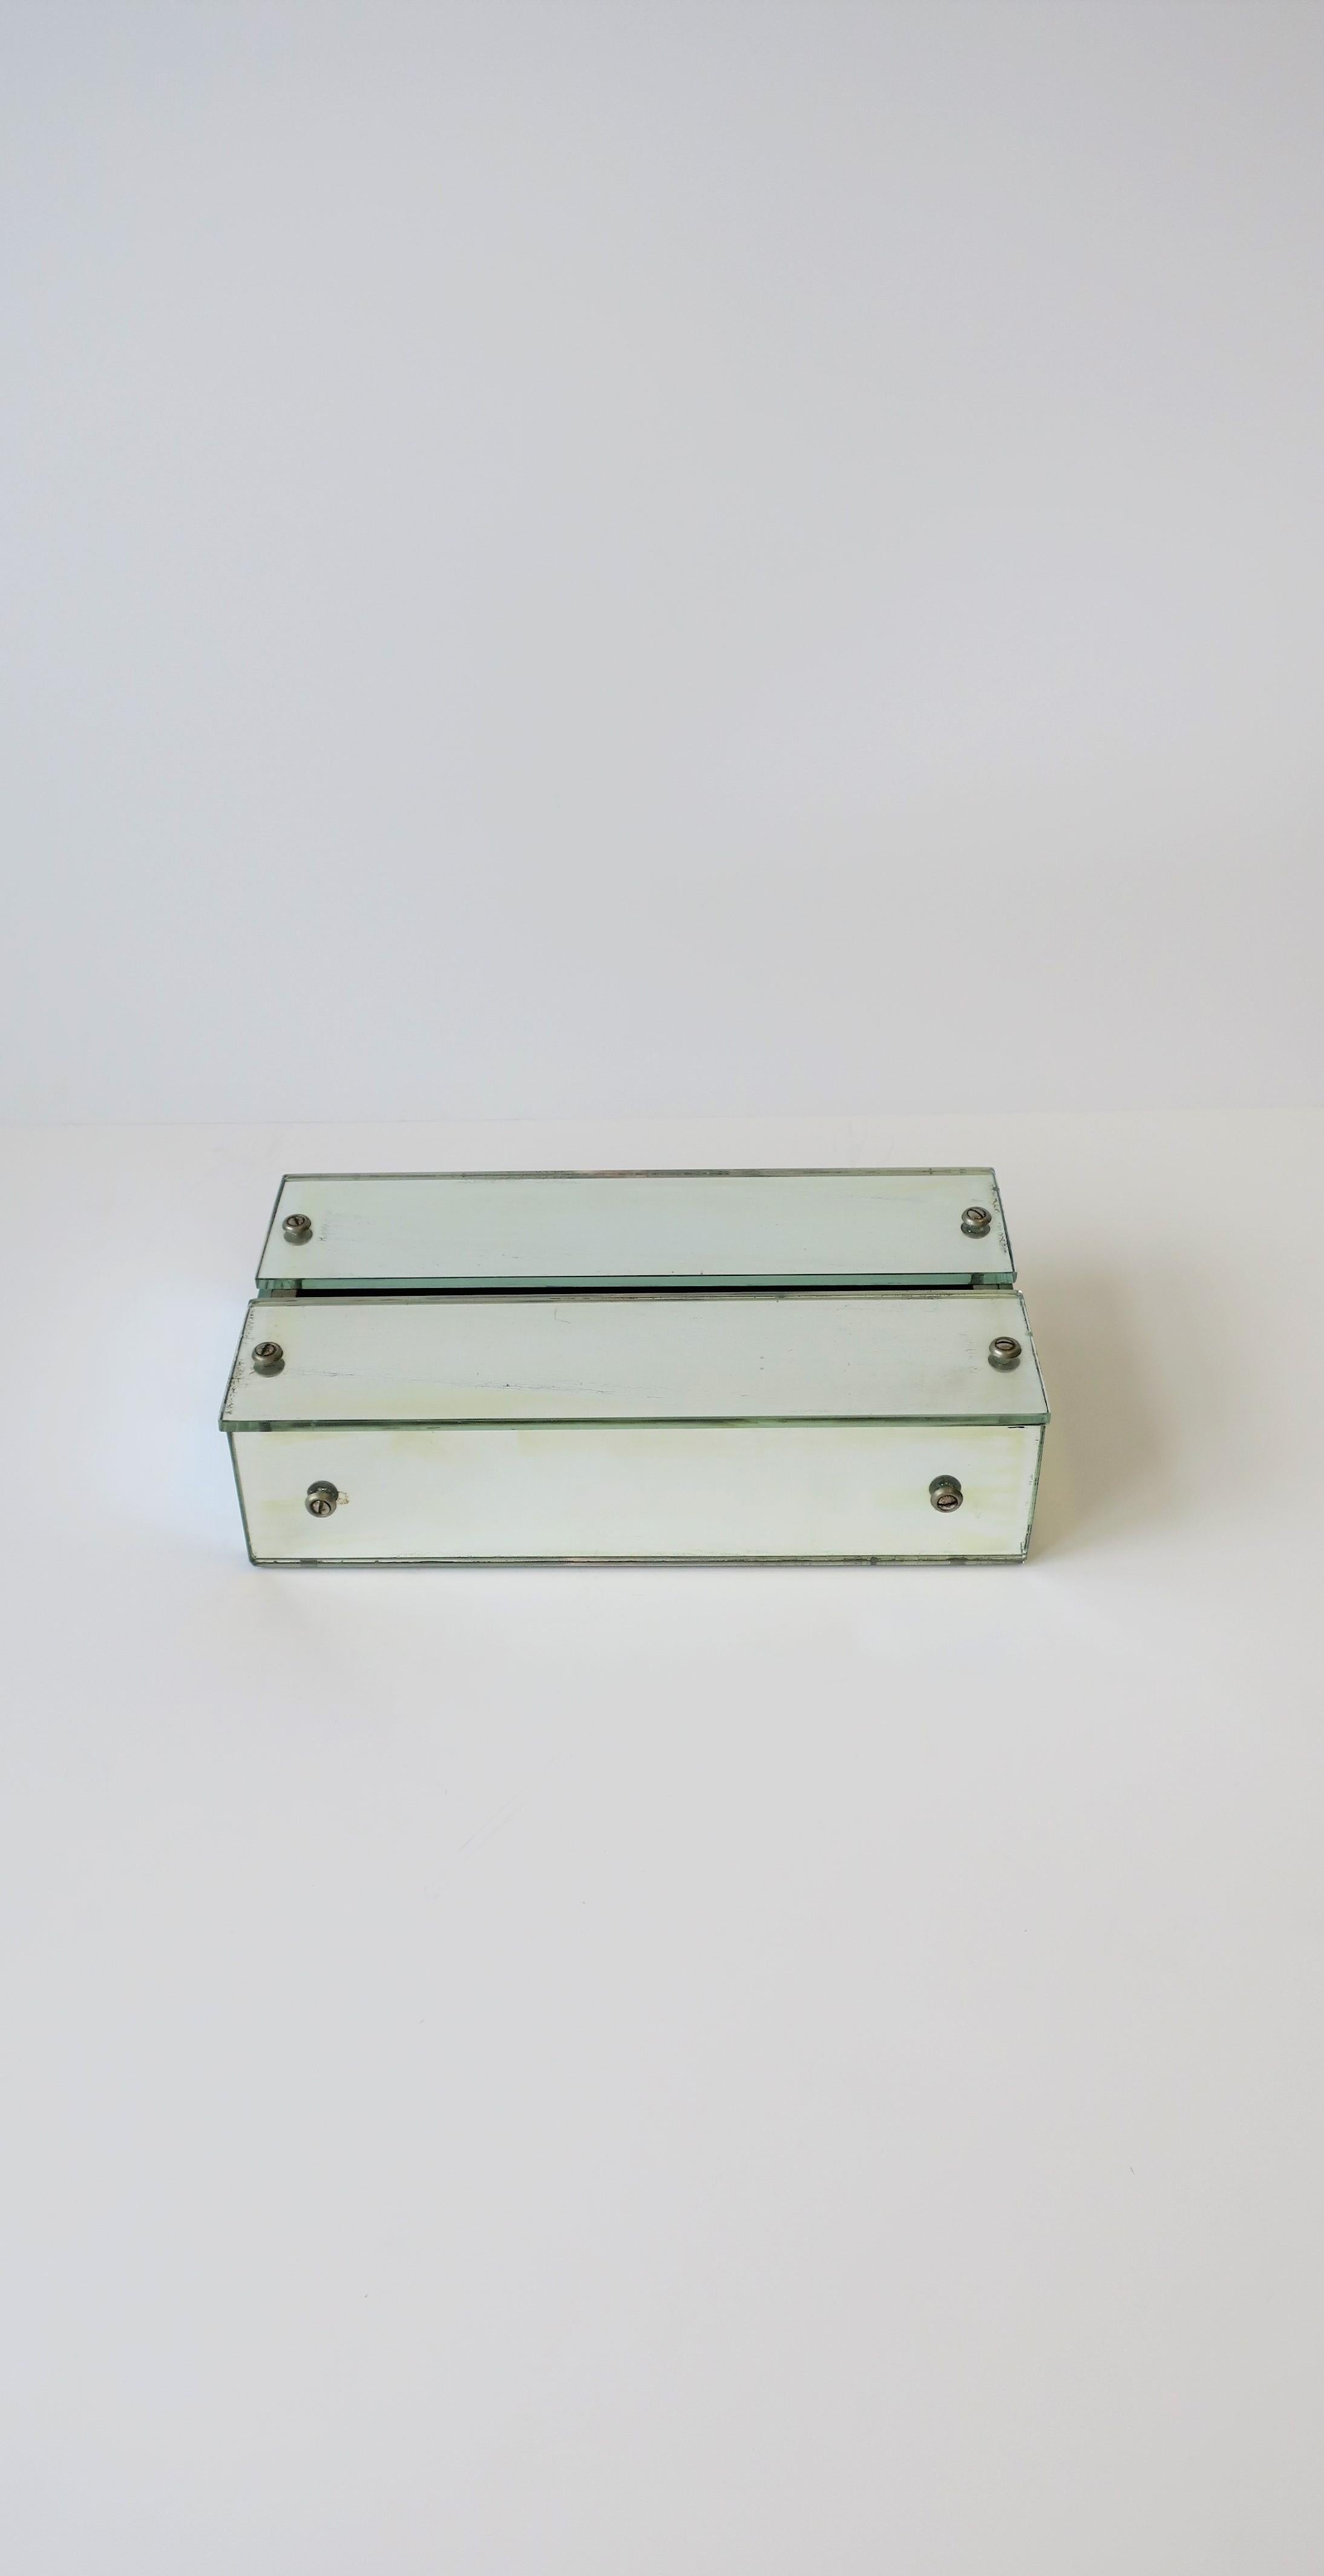 A chic '70s Modern or Postmodern [Post-Modern] mirrored tissue holder box with metal screw detail, circa 1970s. Box opens on bottom (slides out), please see images #12 and 13. A great piece for any office, vanity area, bathroom, etc. Hold standard